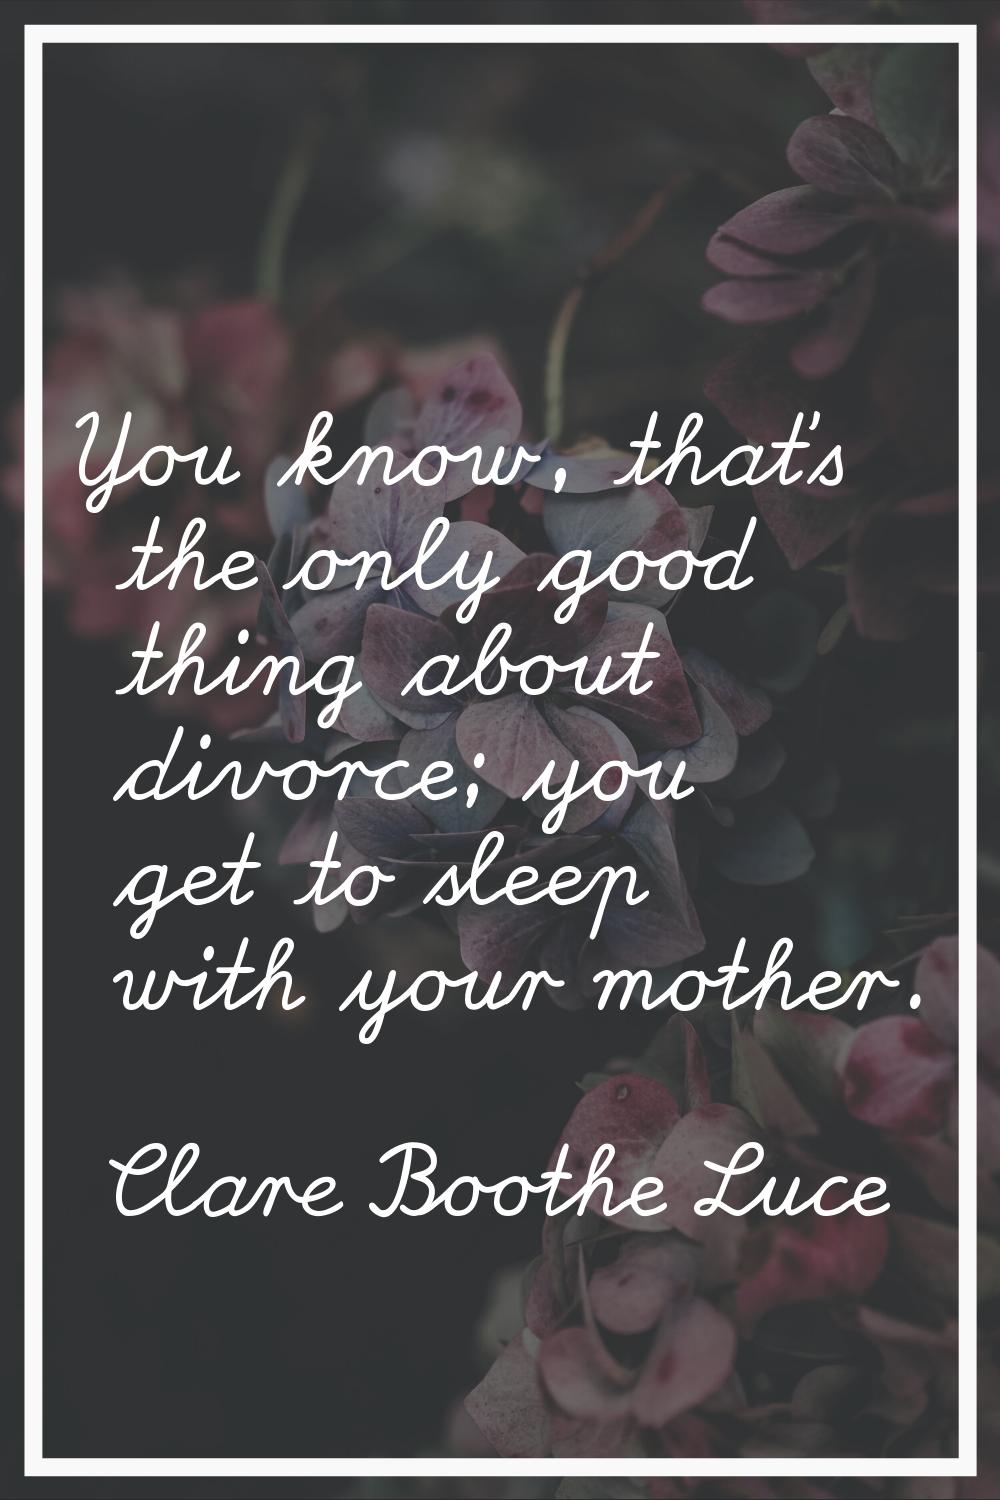 You know, that's the only good thing about divorce; you get to sleep with your mother.